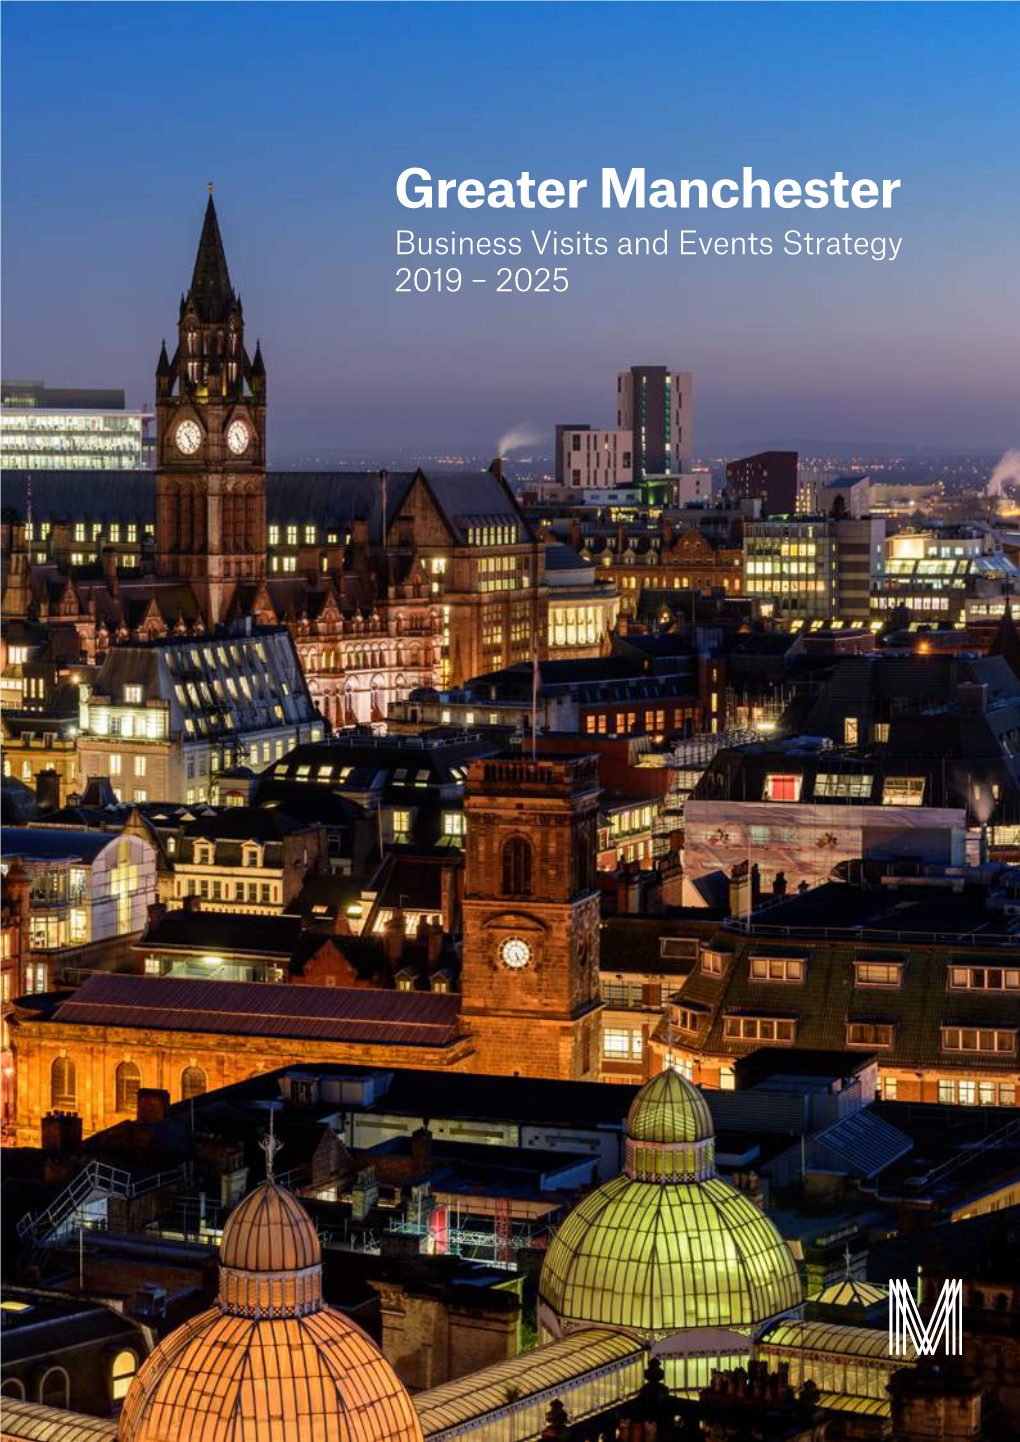 Greater Manchester Business Tourism Strategy